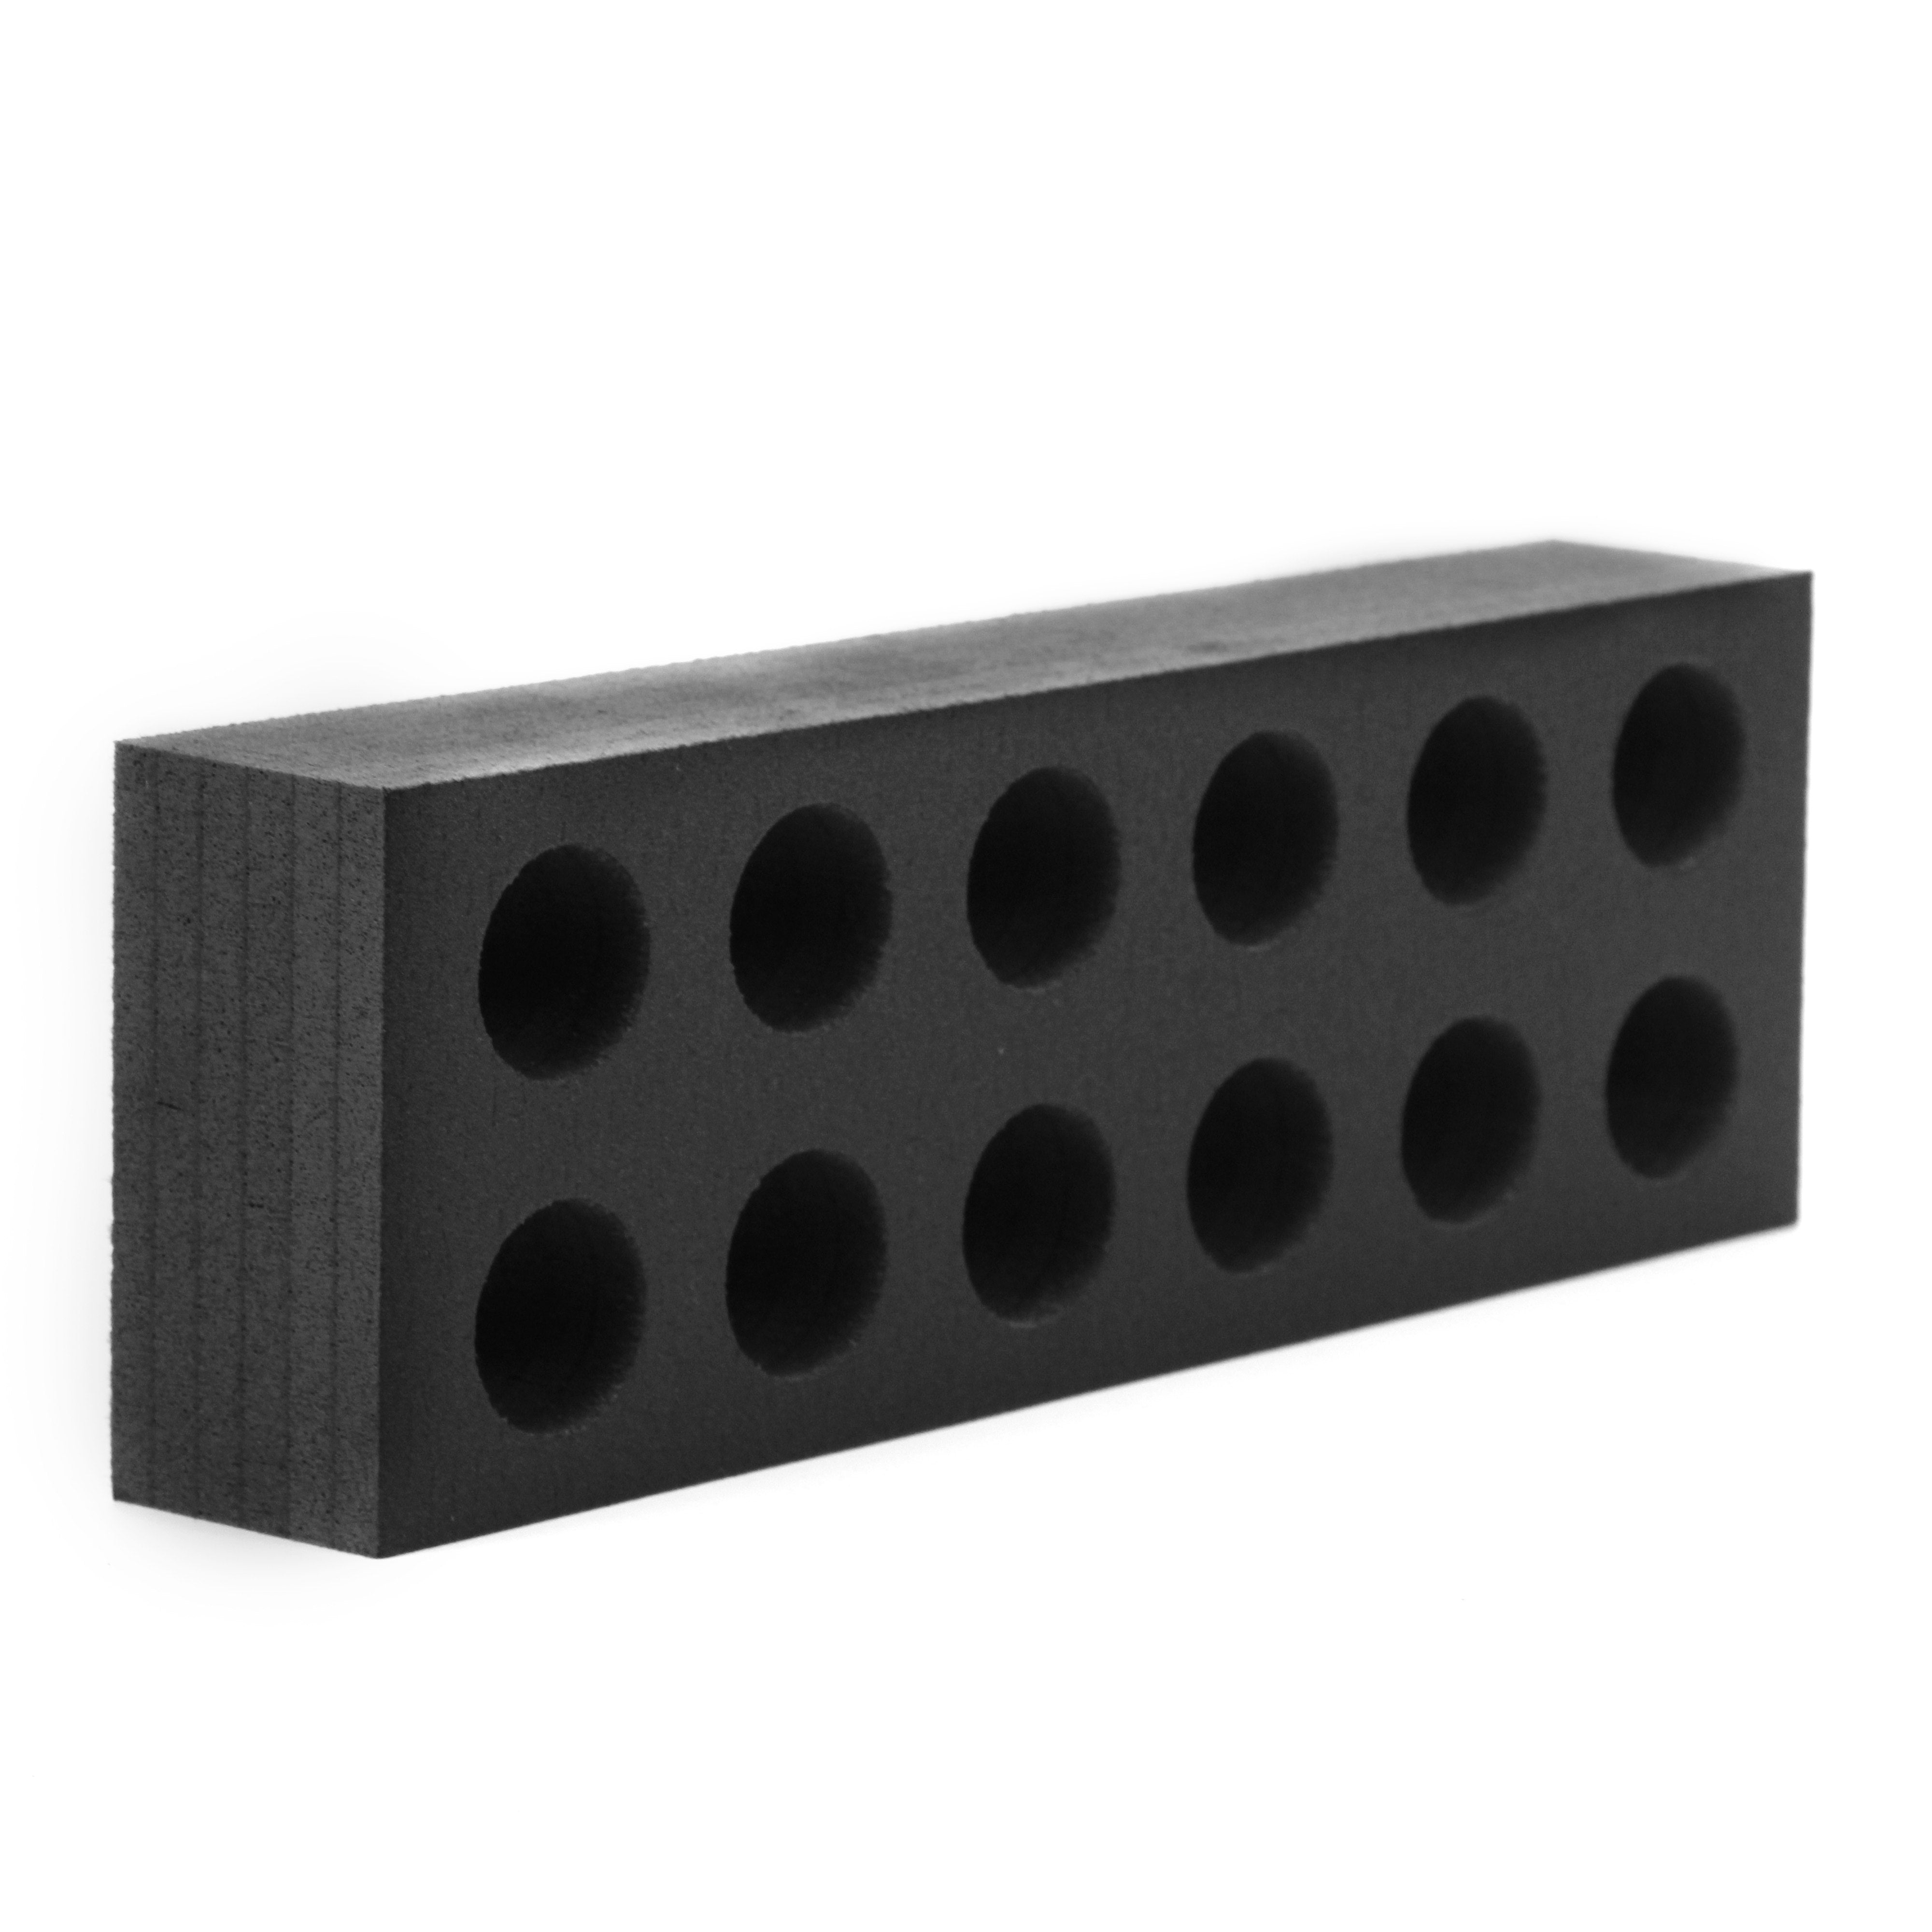 Heavy Duty Foam Dunnage Circular Holes Reusable Transport Storage Organization Shipping Boxes Crates Containers Warehouses Waterproof 8x4x2 Inches